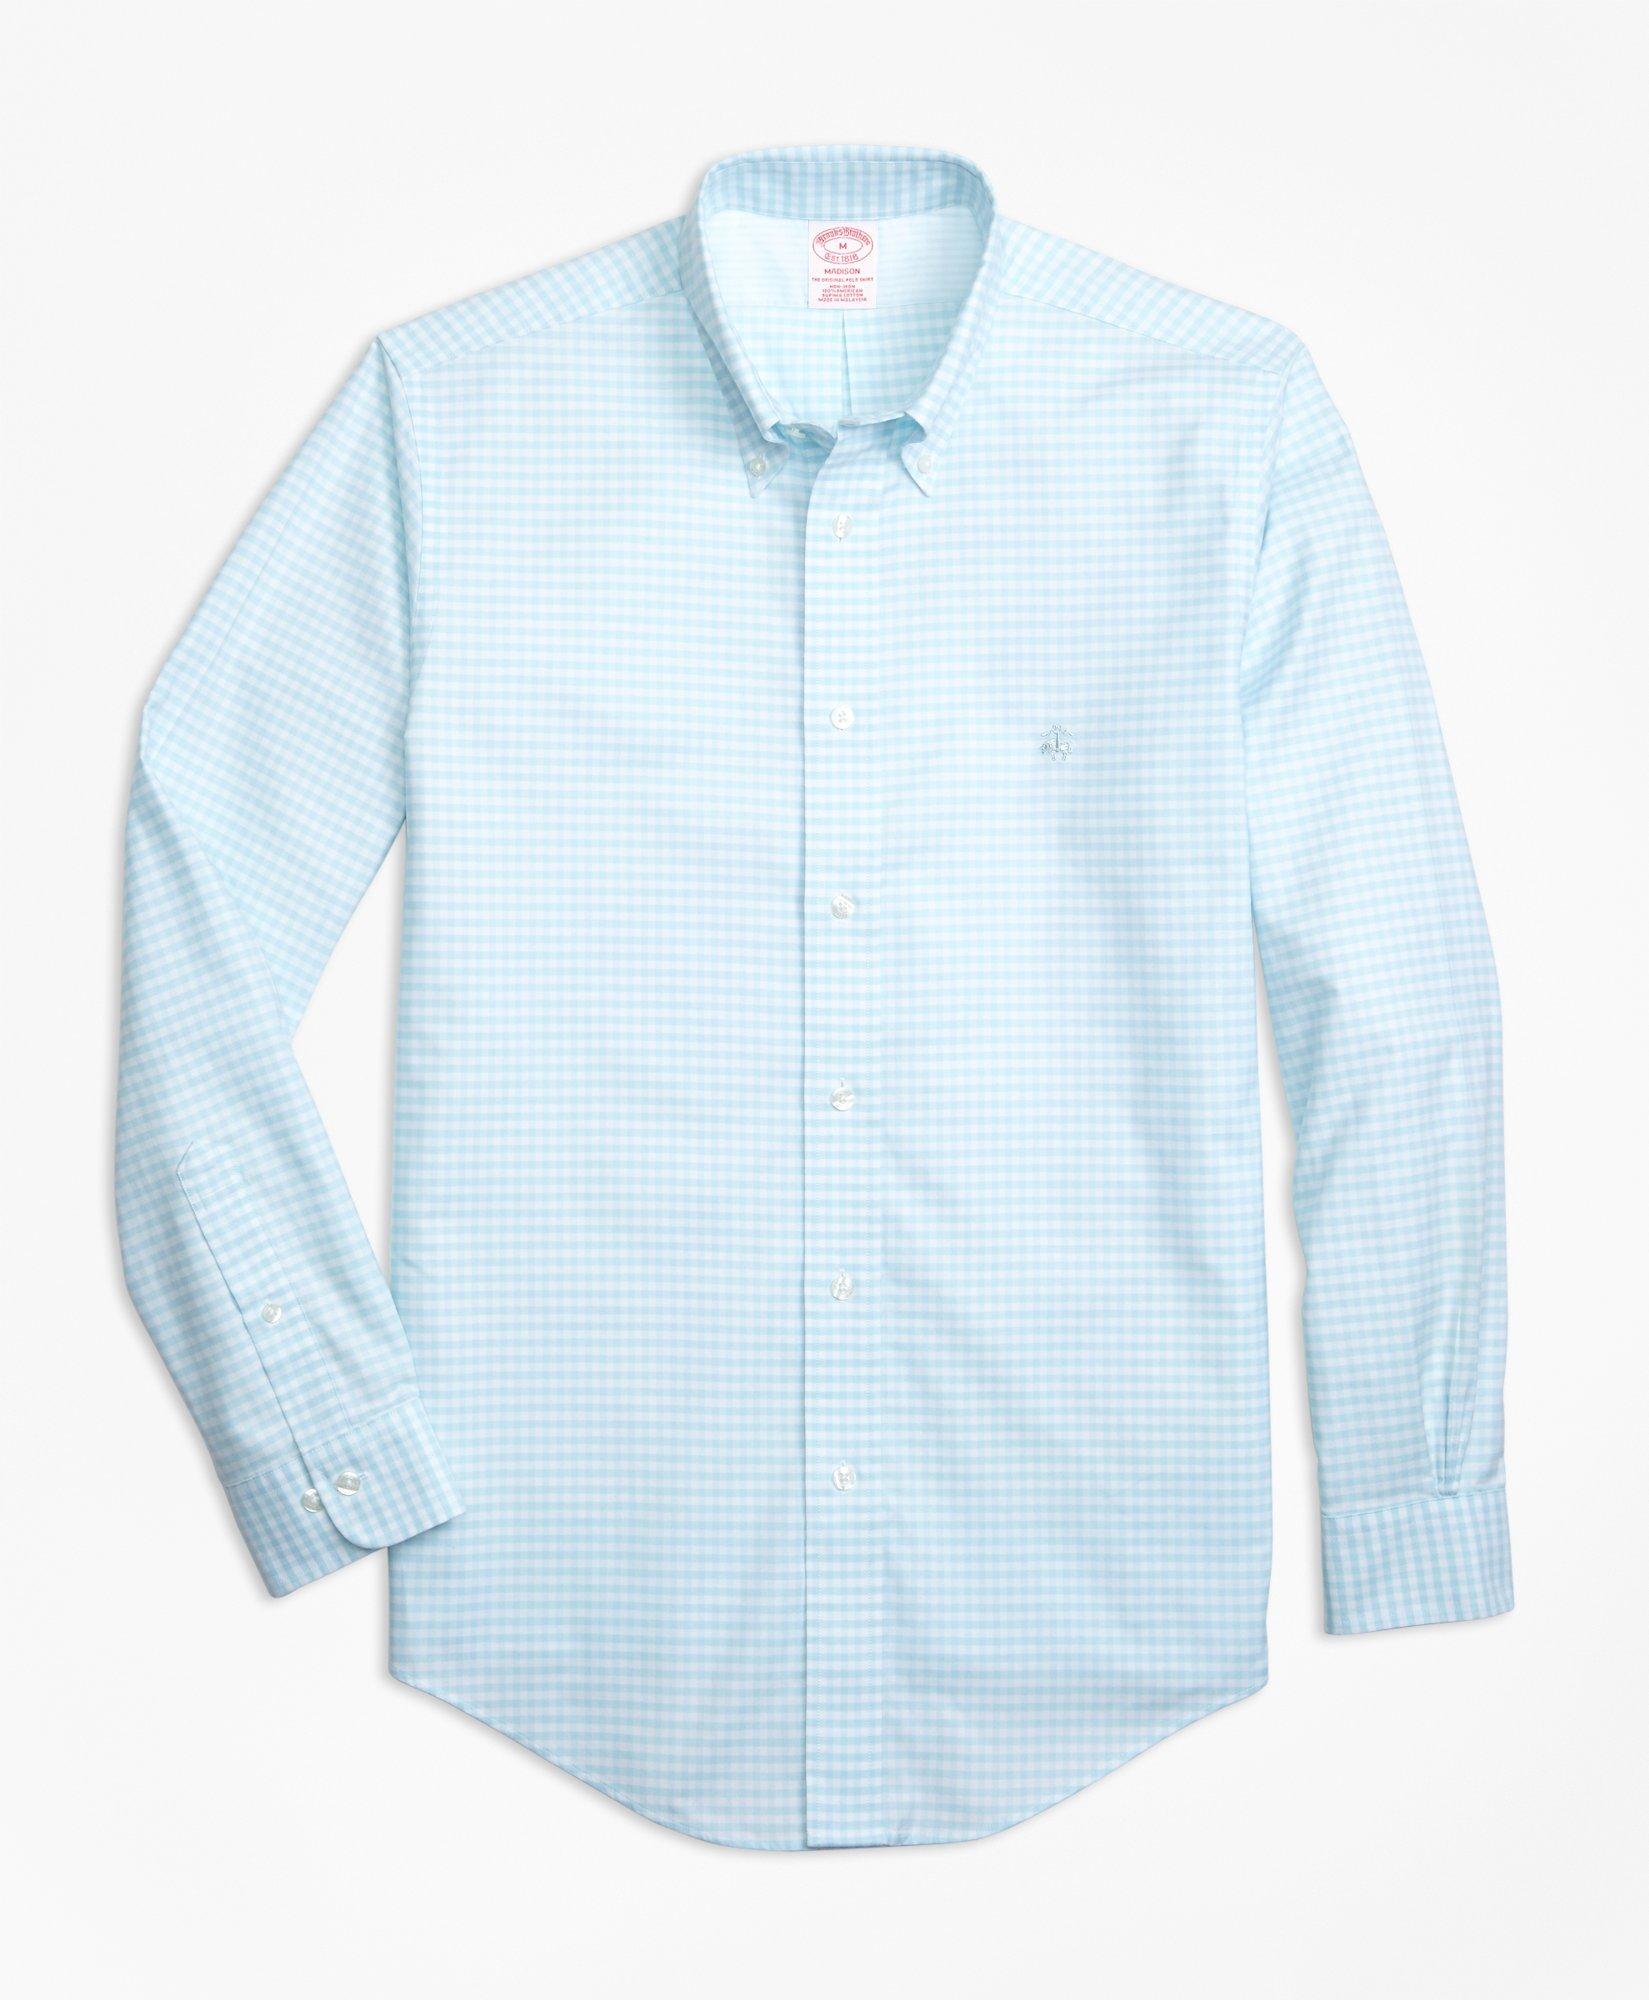 Madison Relaxed-Fit Sport Shirt, Non-Iron Gingham